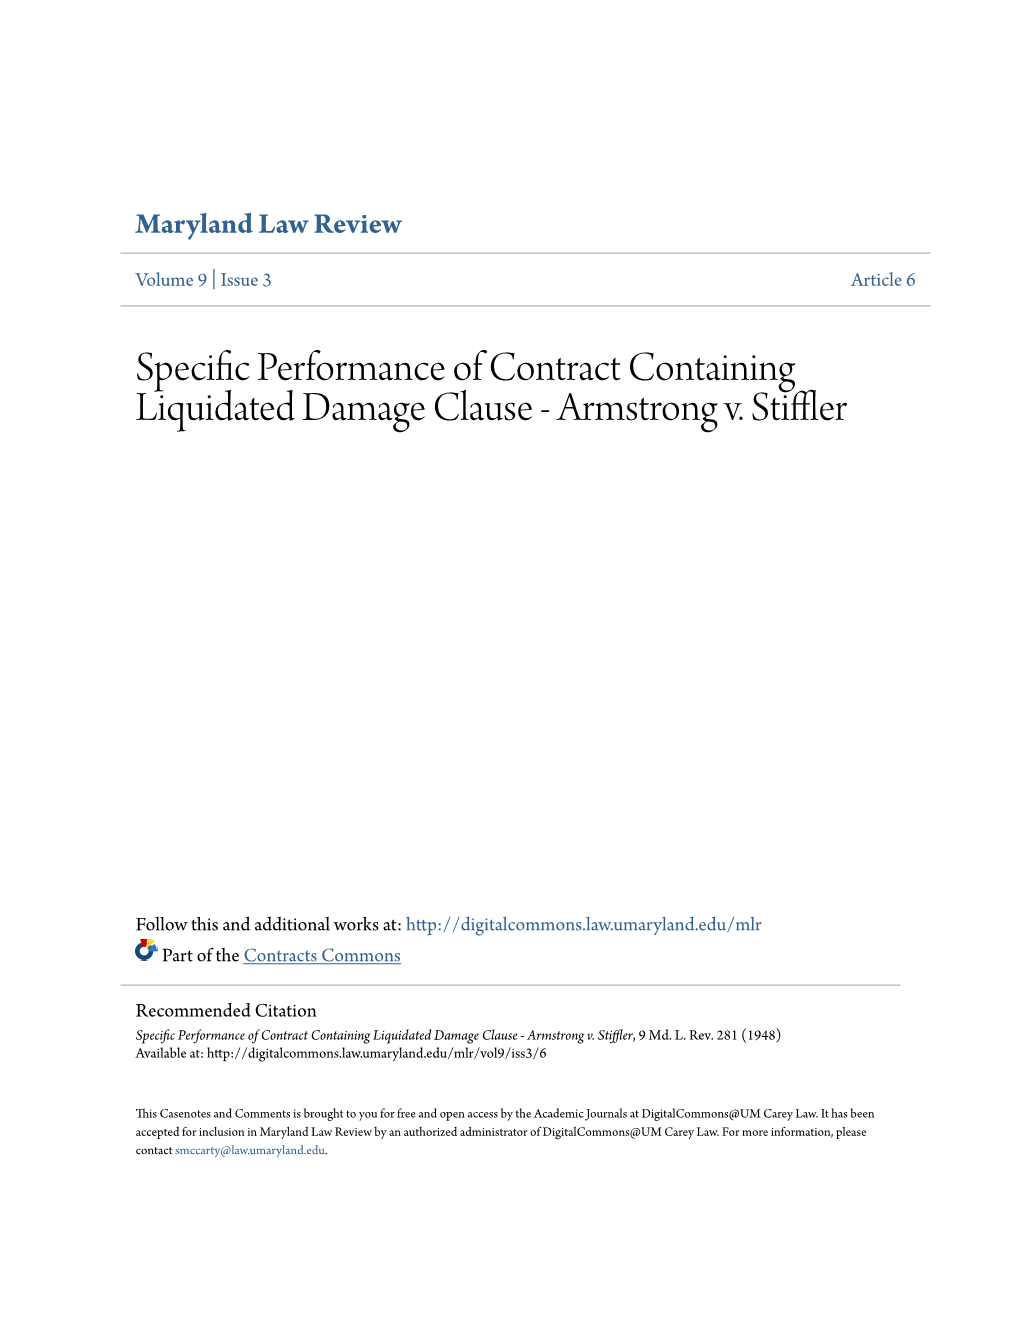 SPECIFIC PERFORMANCE of CONTRACT CONTAINING LIQUIDATED DAMAGE CLAUSE Armstrong V